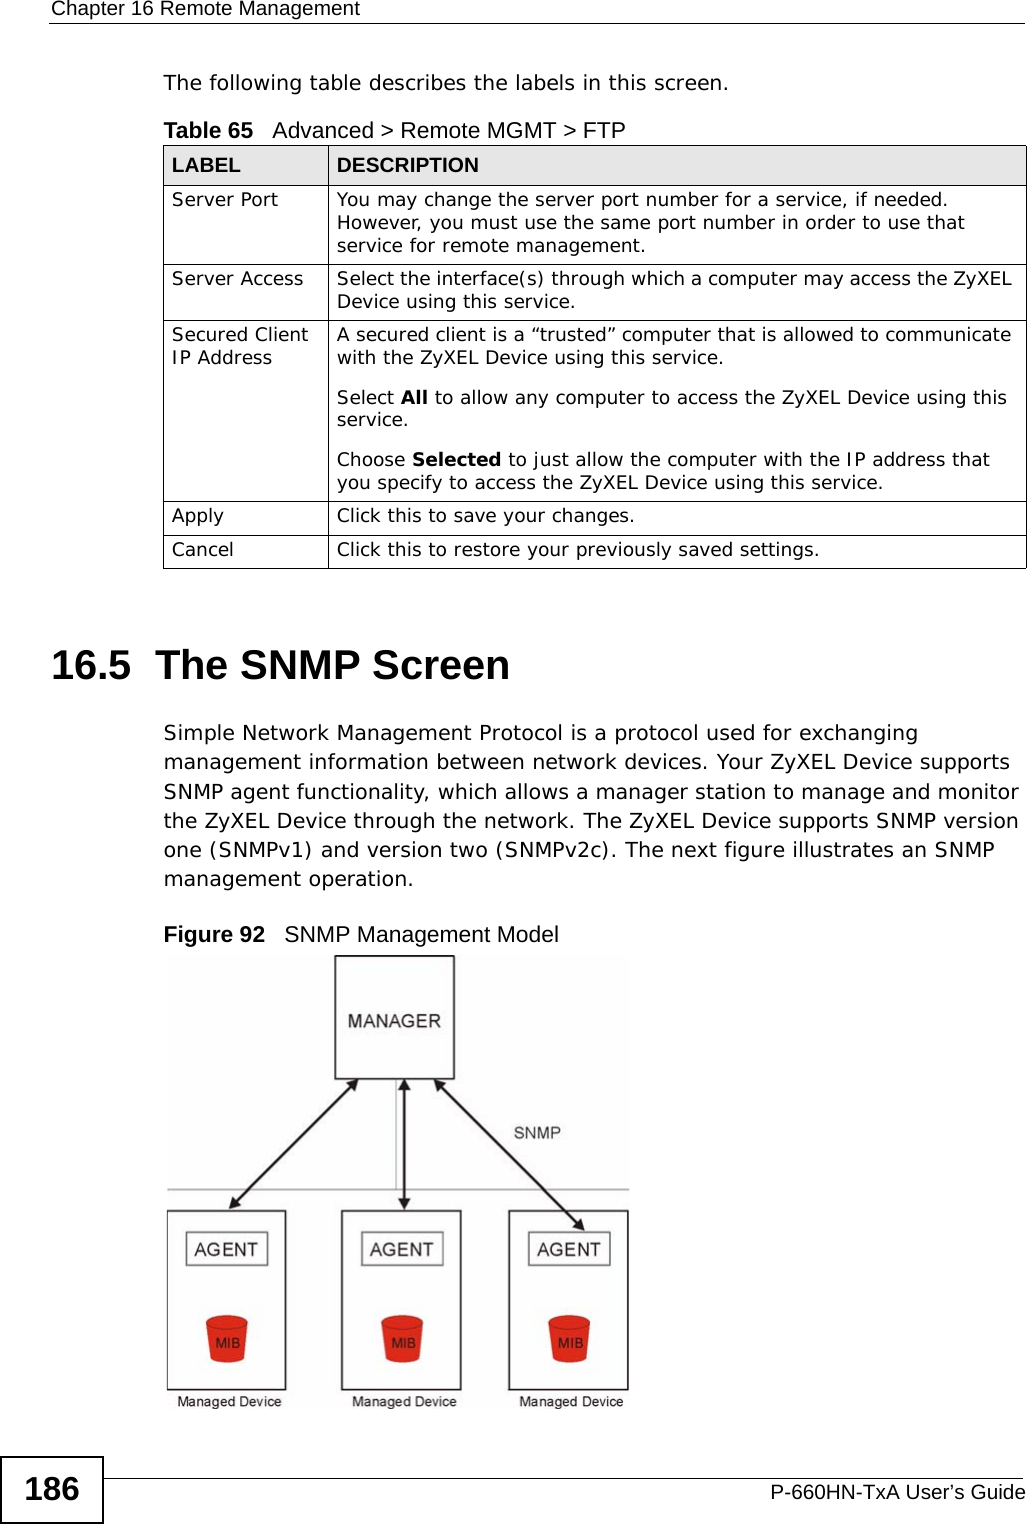 Chapter 16 Remote ManagementP-660HN-TxA User’s Guide186The following table describes the labels in this screen. 16.5  The SNMP ScreenSimple Network Management Protocol is a protocol used for exchanging management information between network devices. Your ZyXEL Device supports SNMP agent functionality, which allows a manager station to manage and monitor the ZyXEL Device through the network. The ZyXEL Device supports SNMP version one (SNMPv1) and version two (SNMPv2c). The next figure illustrates an SNMP management operation.Figure 92   SNMP Management ModelTable 65   Advanced &gt; Remote MGMT &gt; FTPLABEL DESCRIPTIONServer Port You may change the server port number for a service, if needed. However, you must use the same port number in order to use that service for remote management.Server Access Select the interface(s) through which a computer may access the ZyXEL Device using this service.Secured Client IP Address A secured client is a “trusted” computer that is allowed to communicate with the ZyXEL Device using this service. Select All to allow any computer to access the ZyXEL Device using this service.Choose Selected to just allow the computer with the IP address that you specify to access the ZyXEL Device using this service.Apply Click this to save your changes.Cancel Click this to restore your previously saved settings.